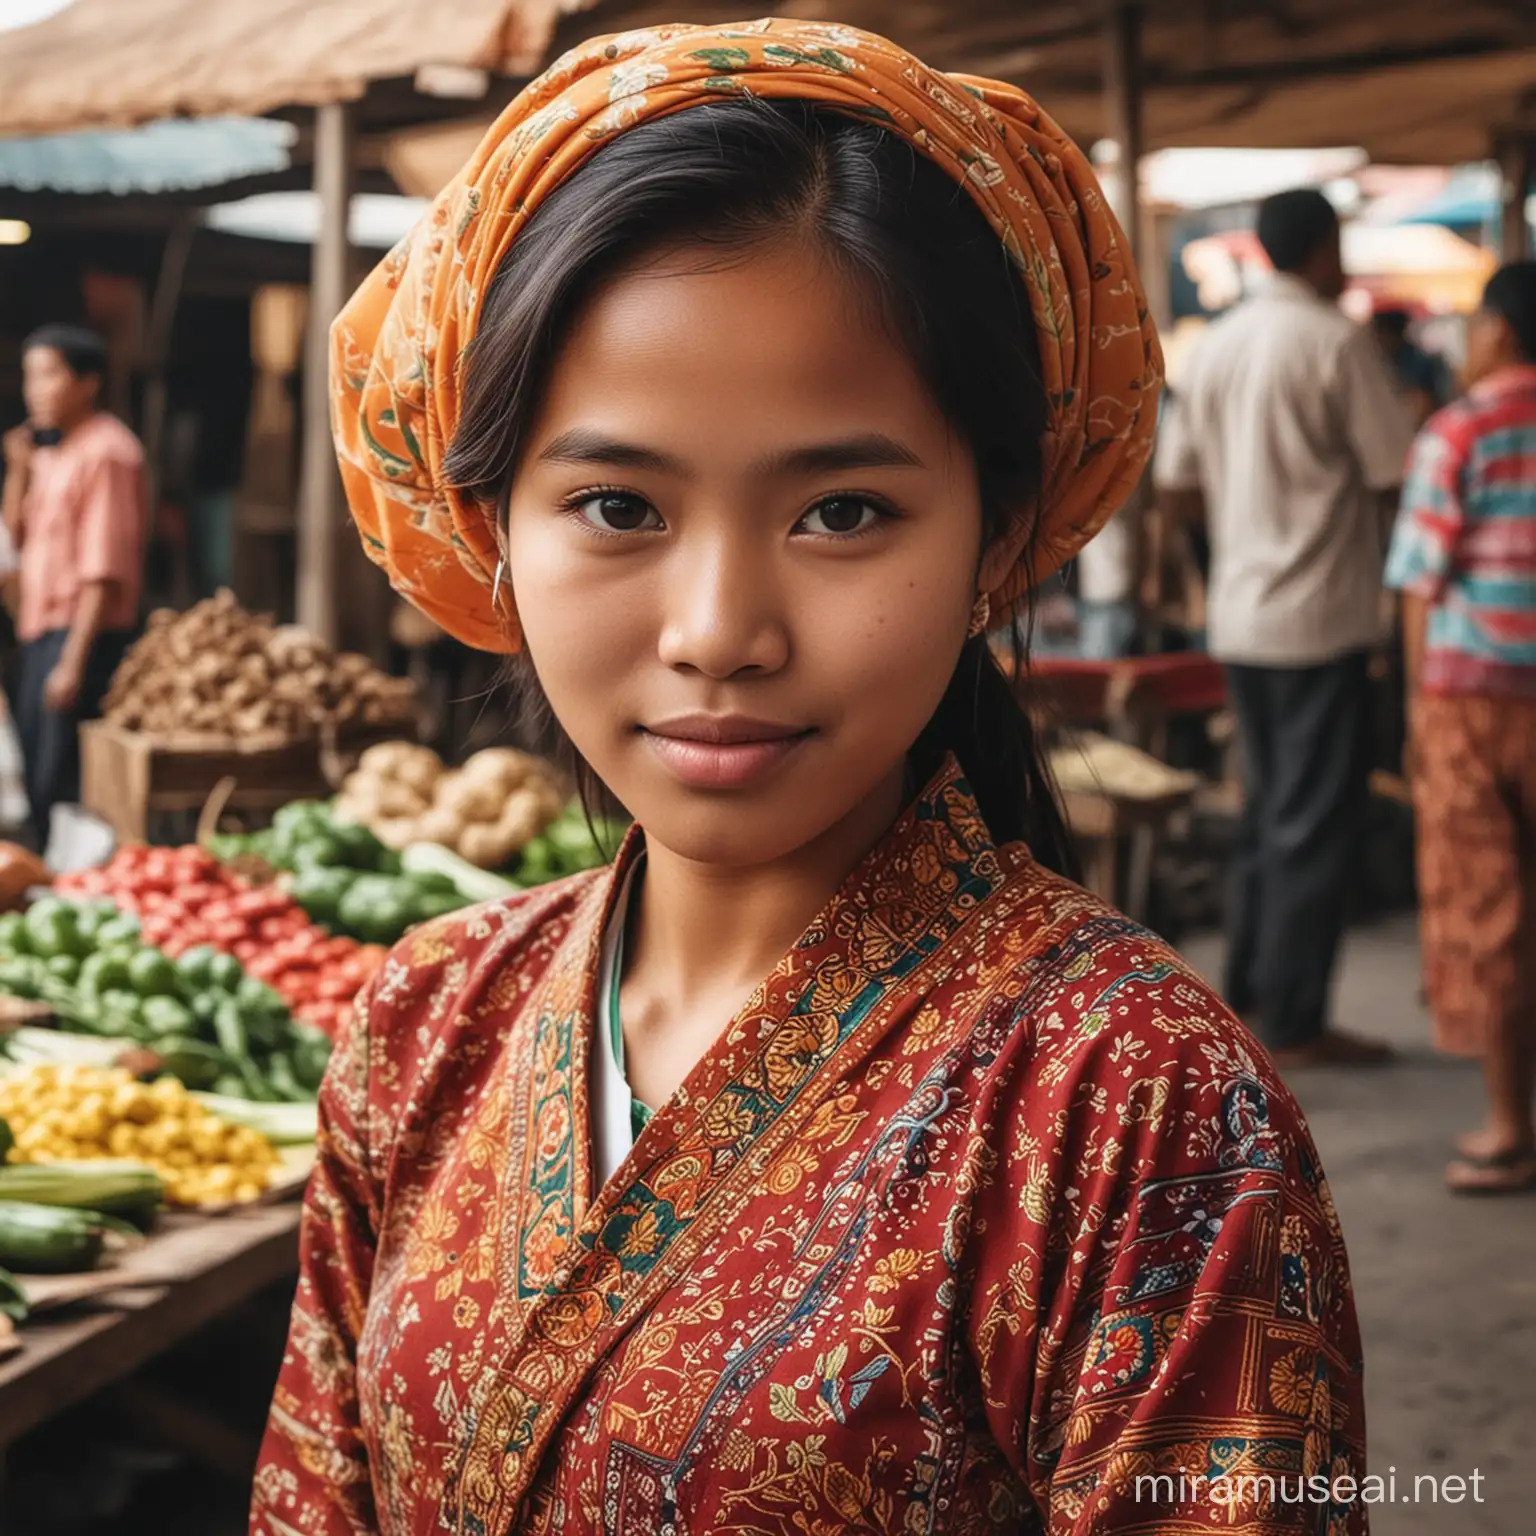 Indonesian Girl Shopping at Vibrant Traditional Market